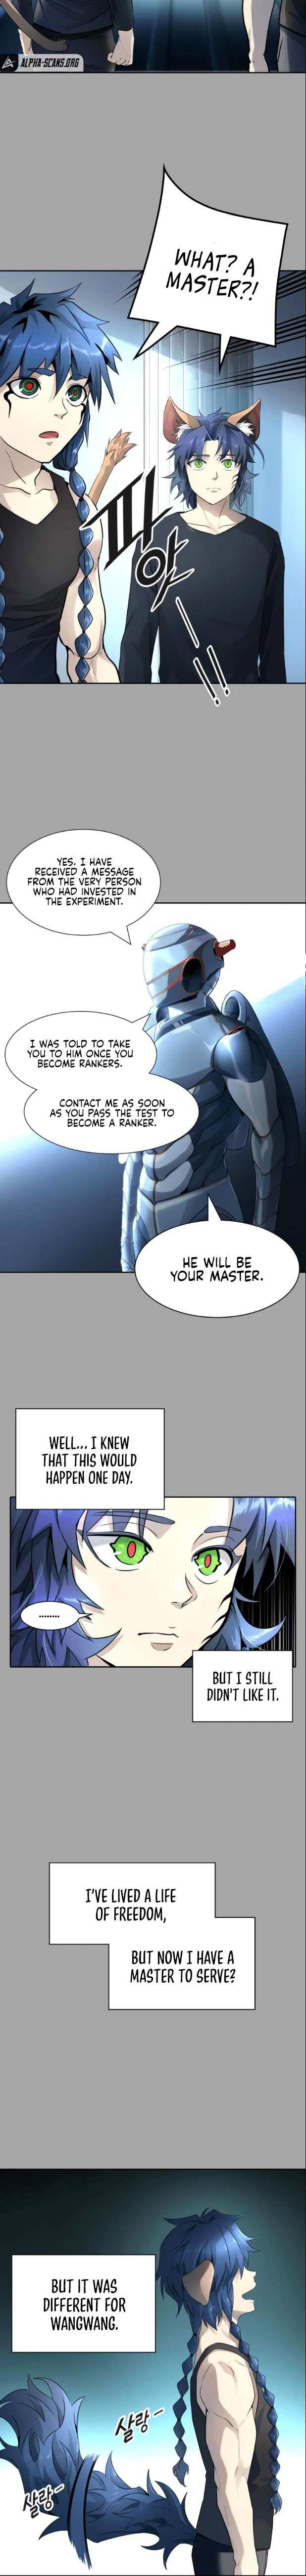 Tower of God Chapter 526 page 11